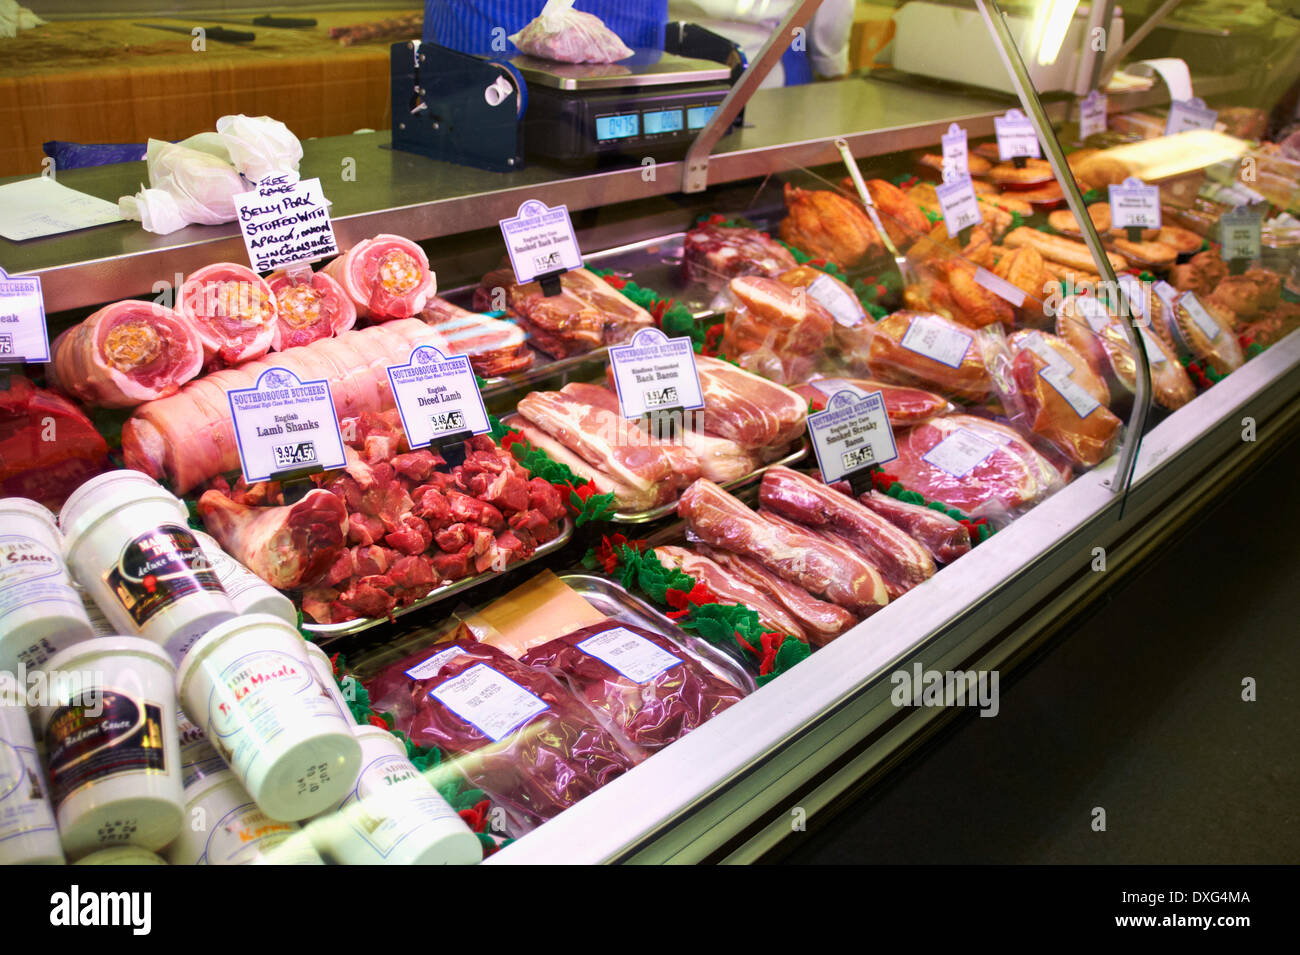 Refrigerated Meat Display In Butchers Shop Stock Photo